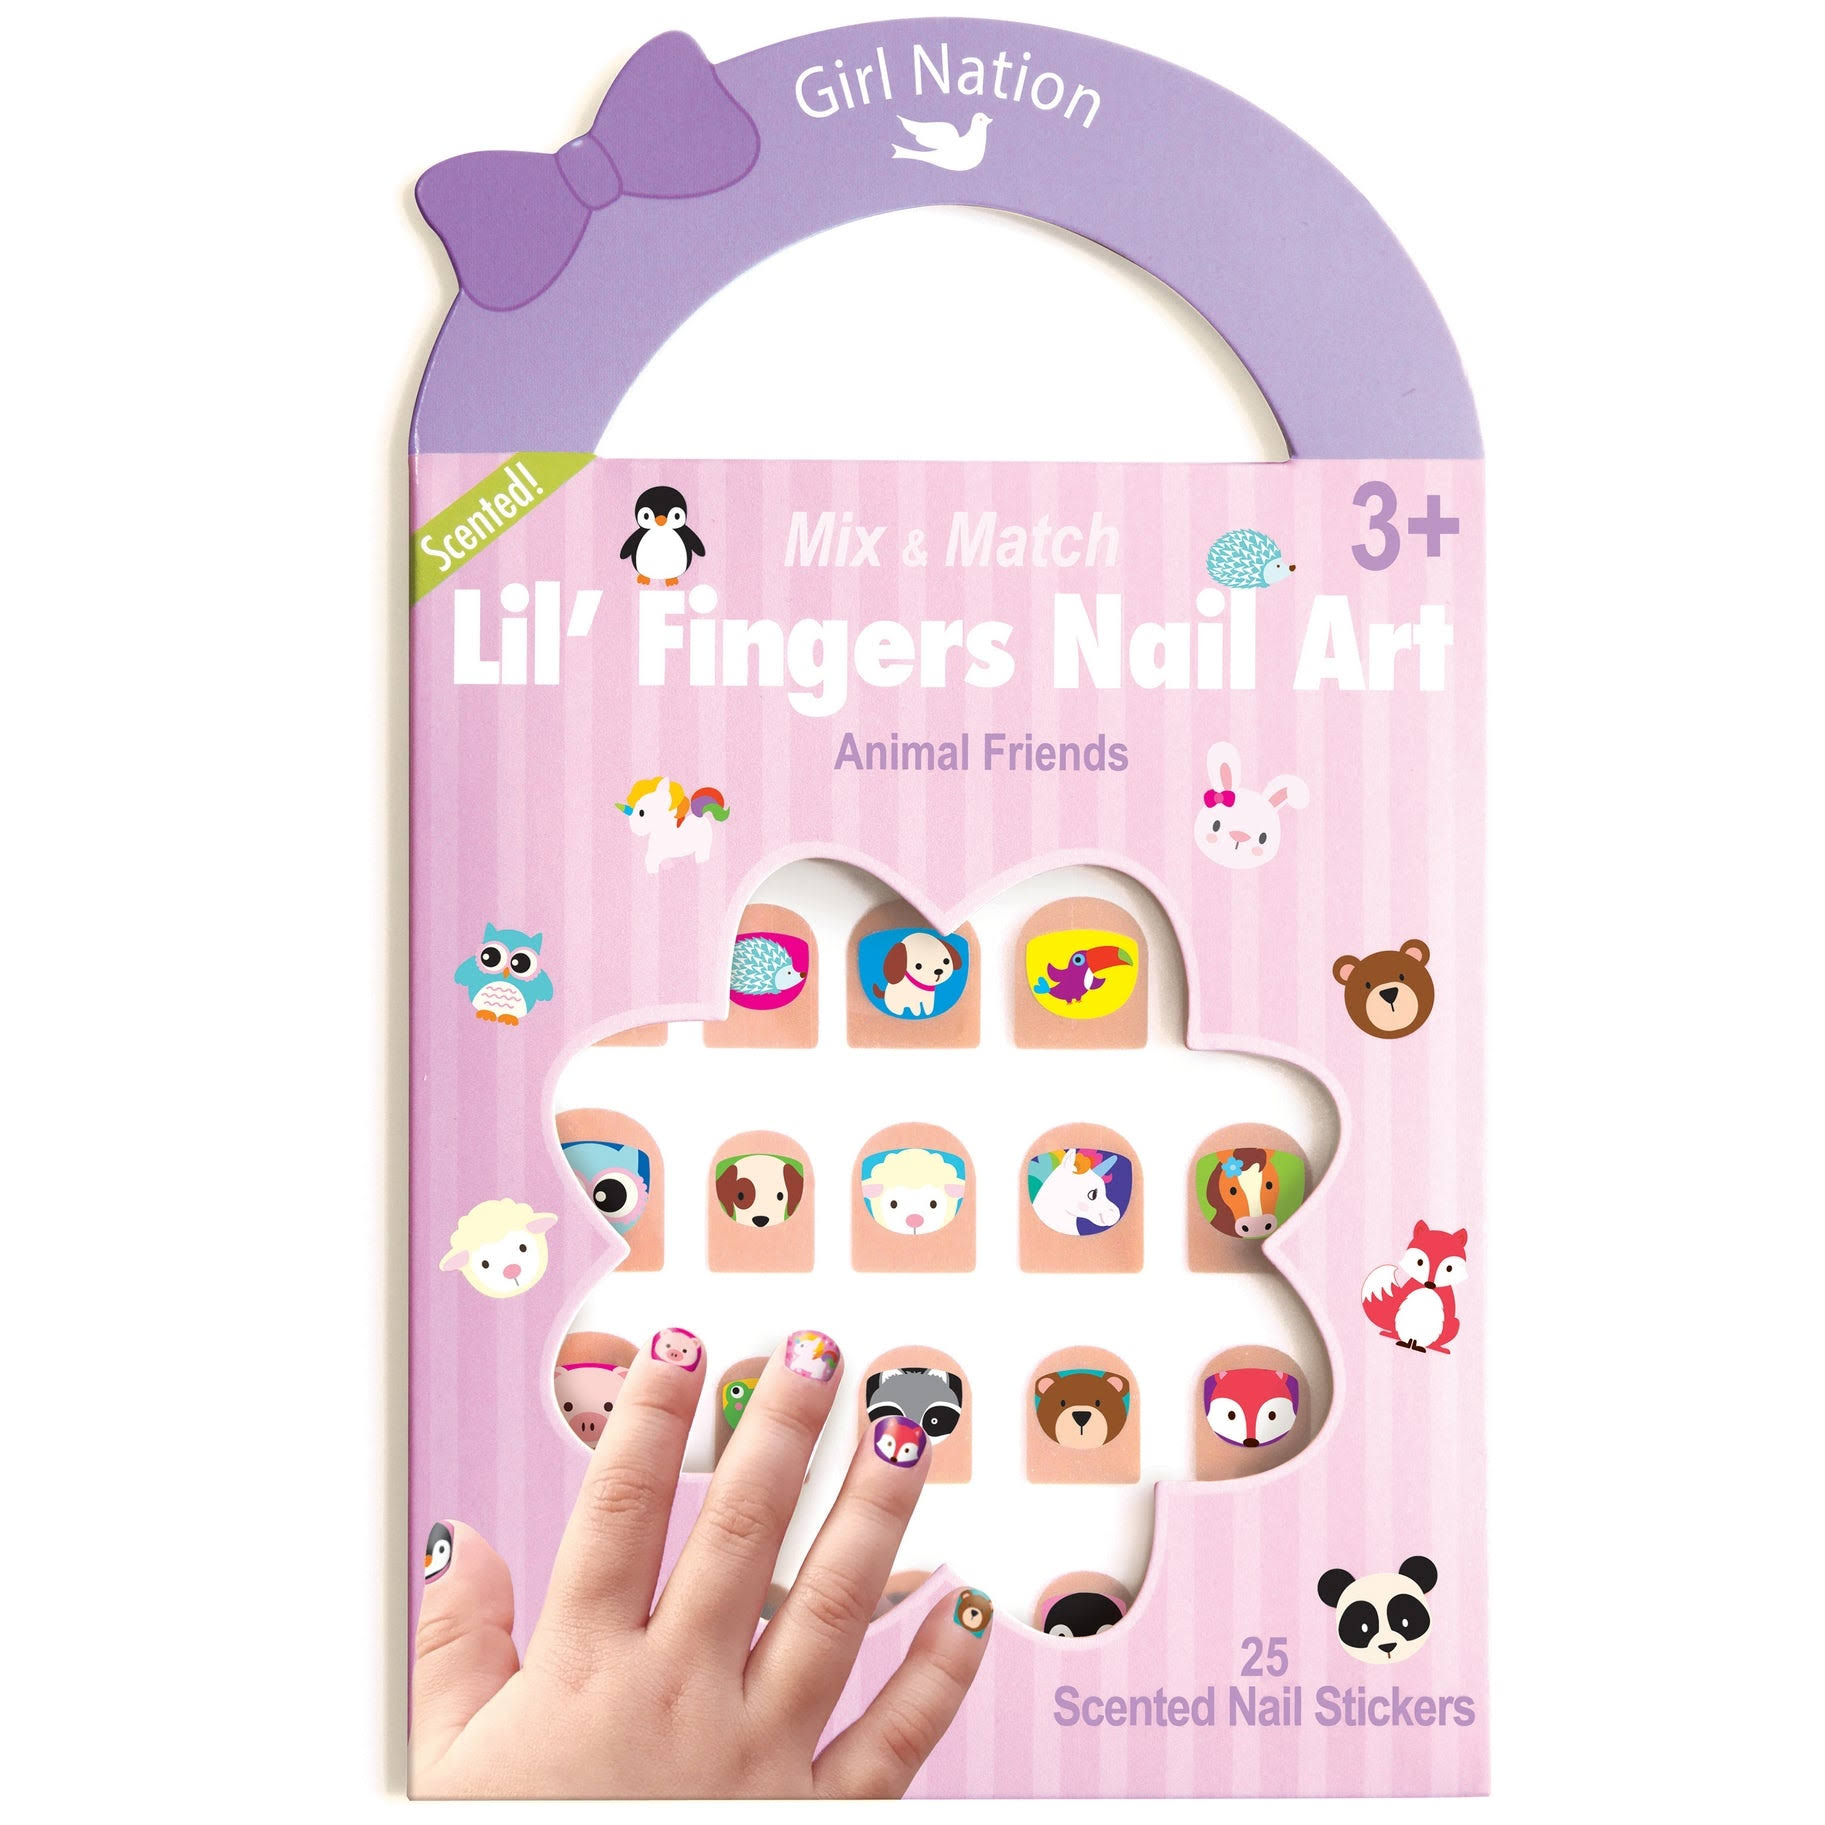 Girl Nation Lil' Fingers Animal Friends Nail Art